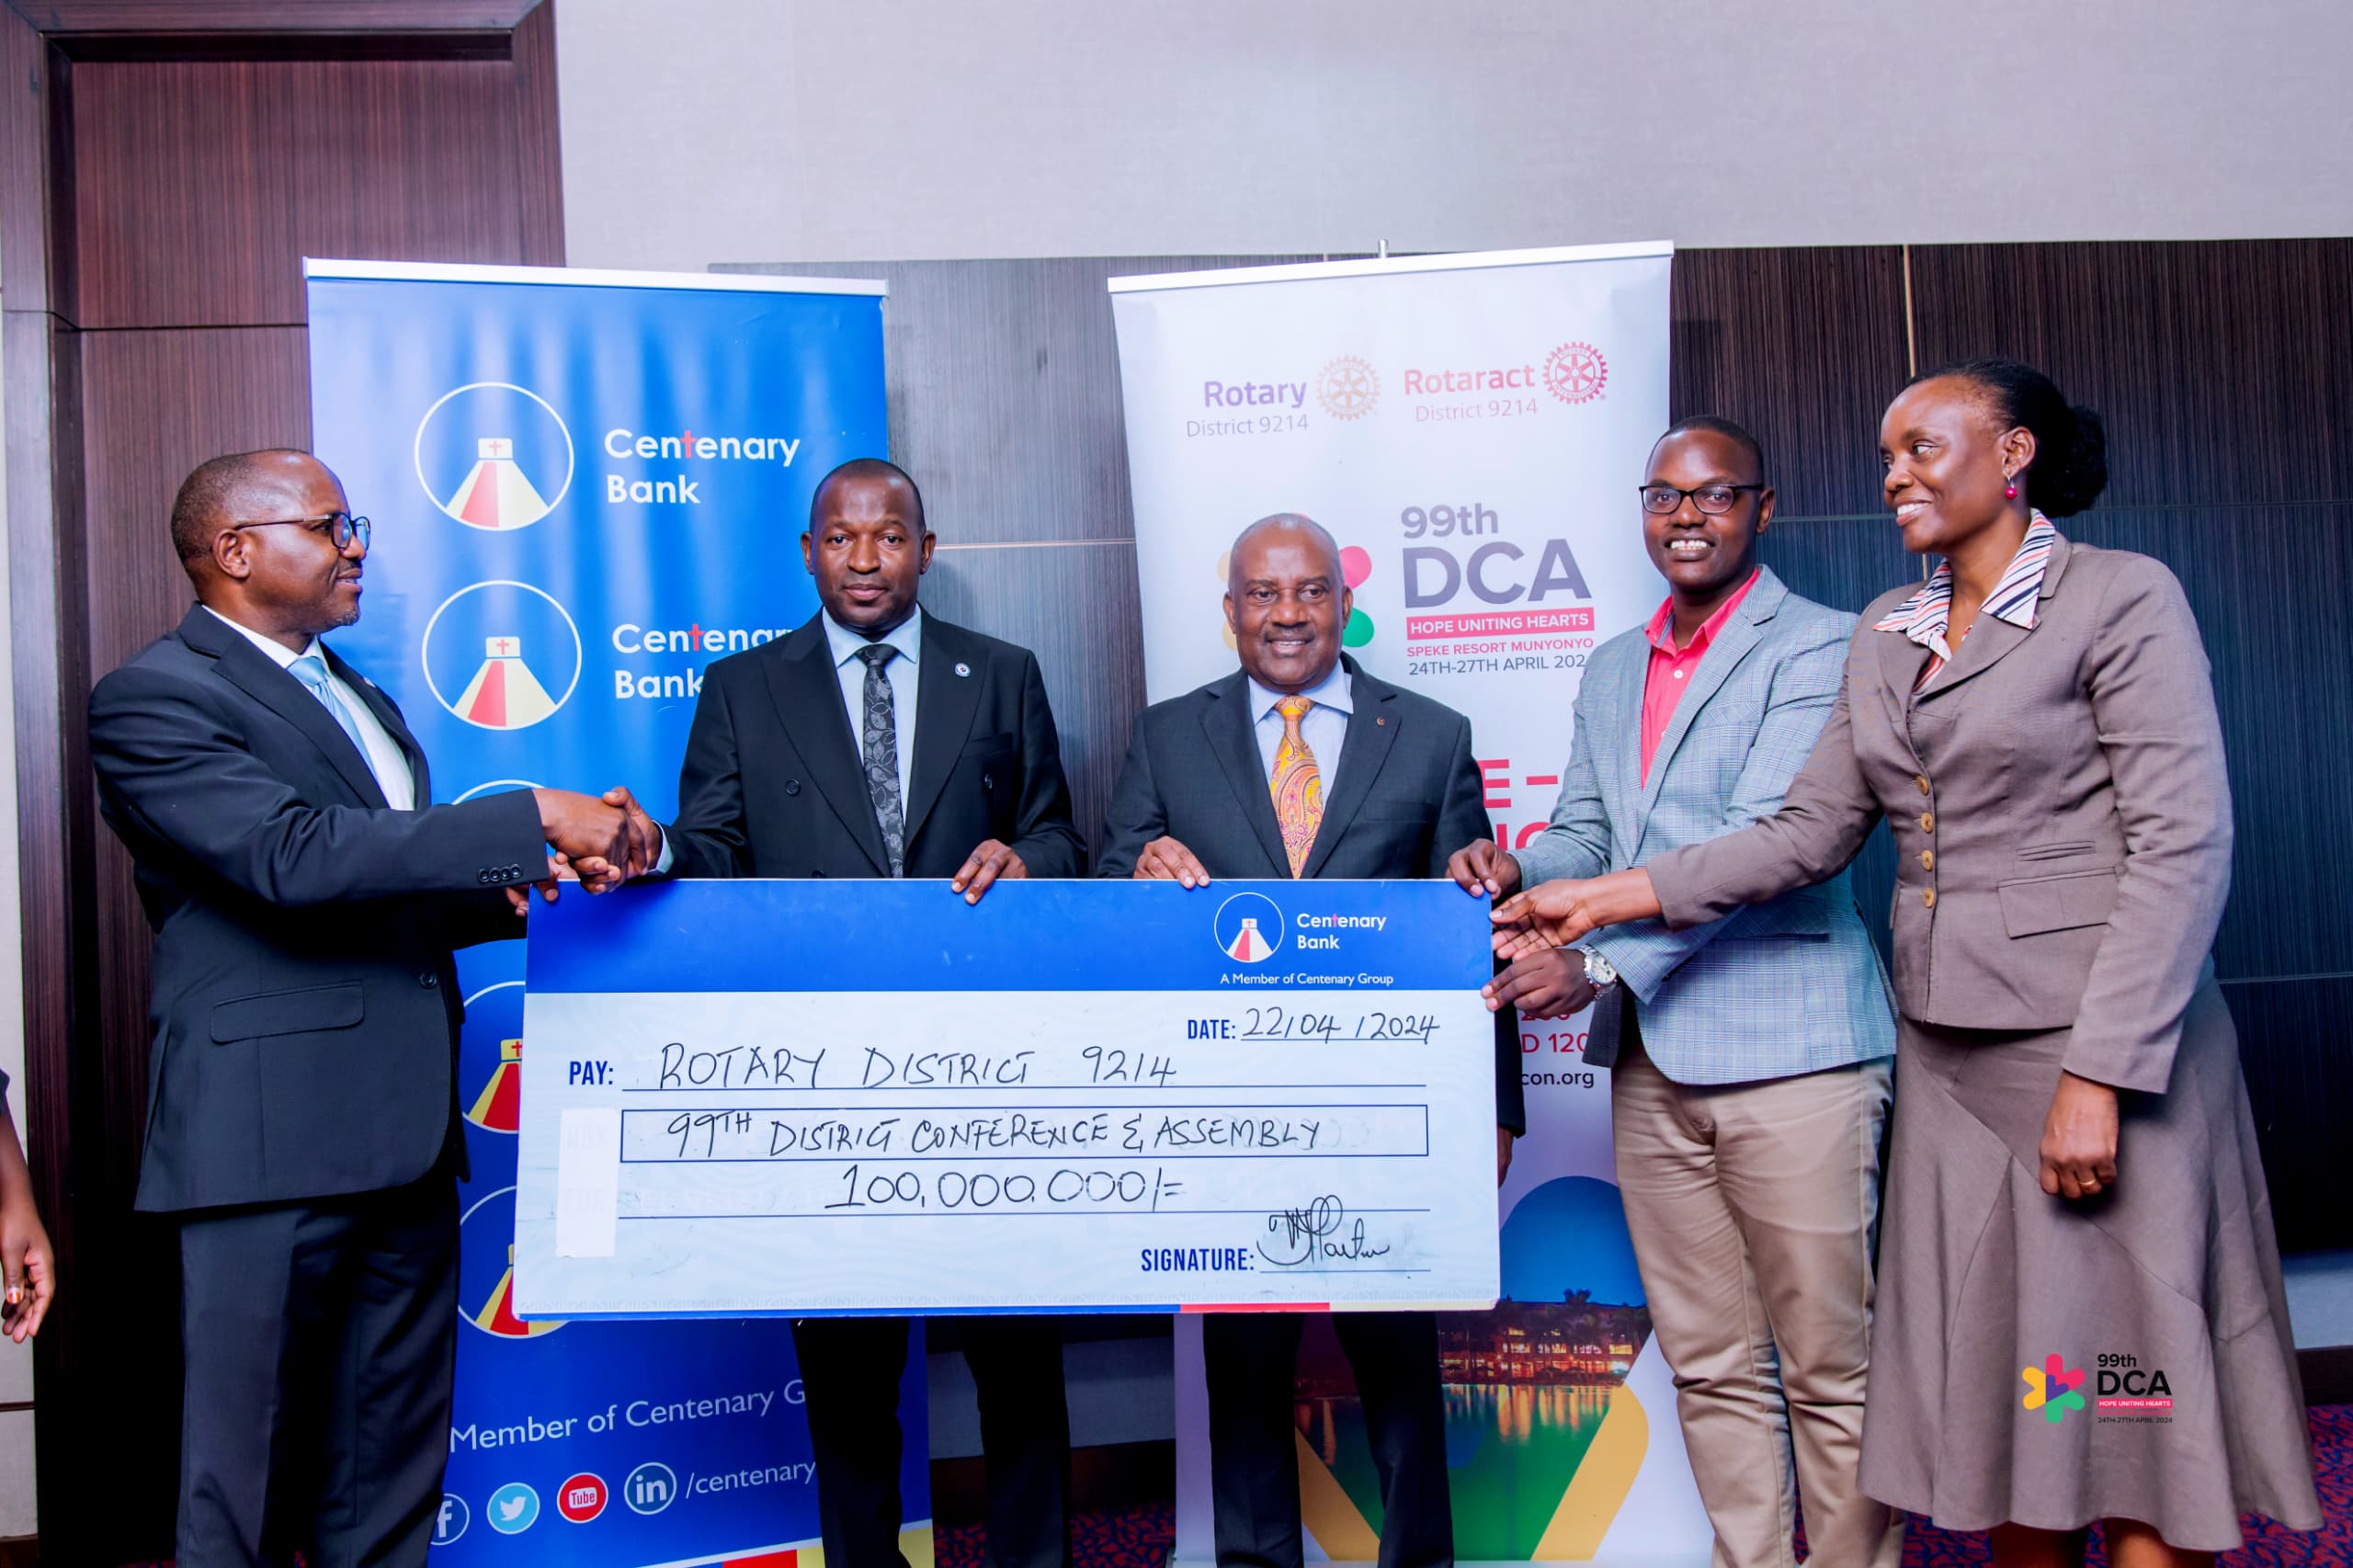 Centenary Bank commits Shs100m to Rotary District Conference